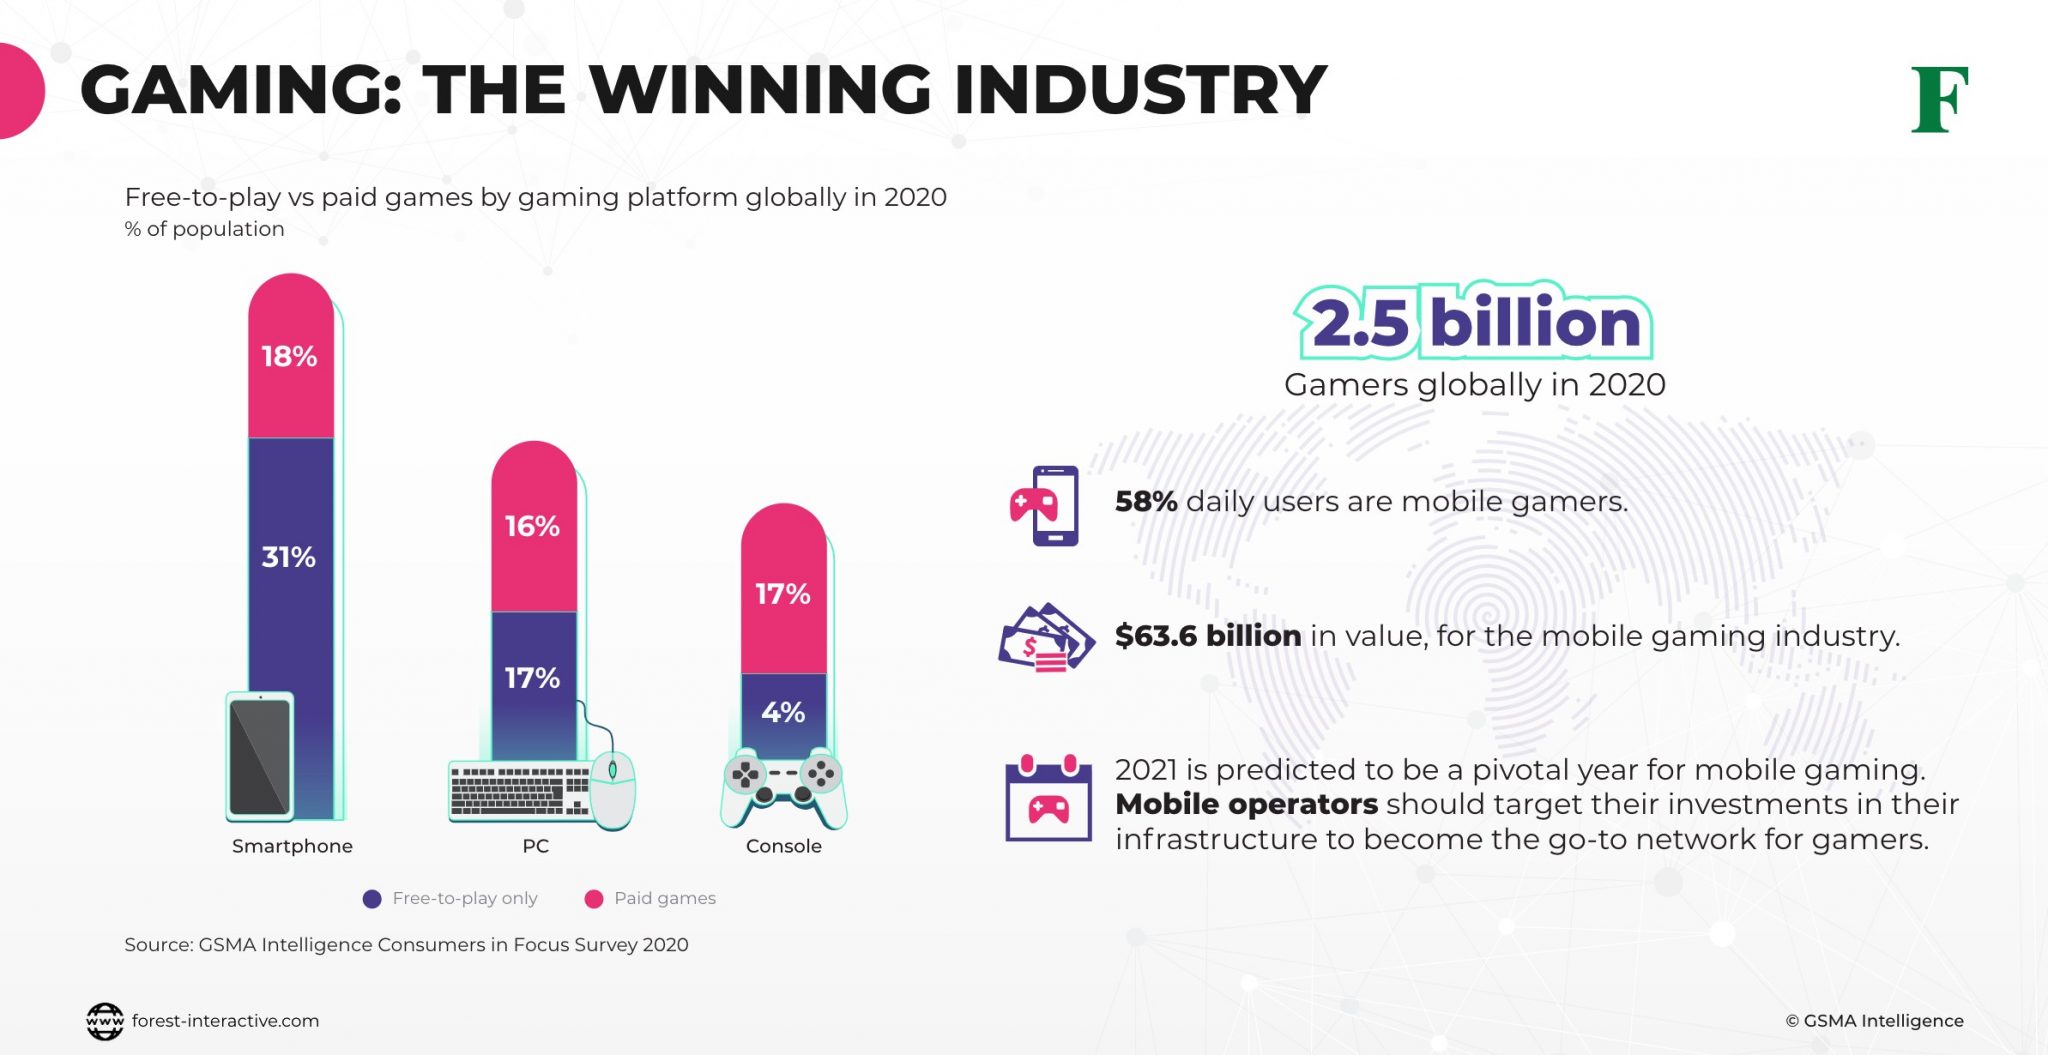 Gaming Industry Set To Soar in 2021 After Scoring Big This Year